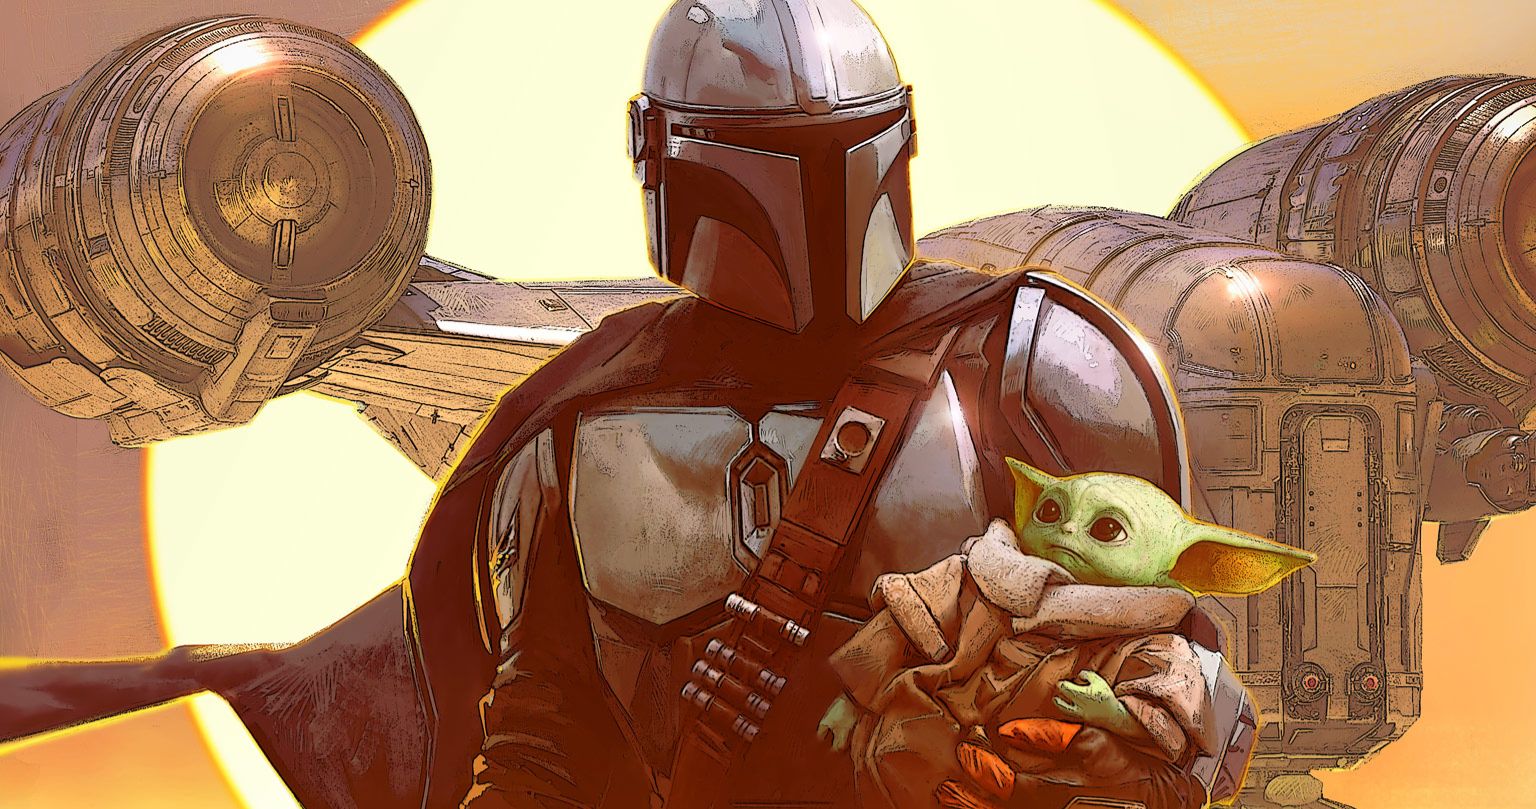 The Mandalorian Universe Expands with New Star Wars Books and Comics